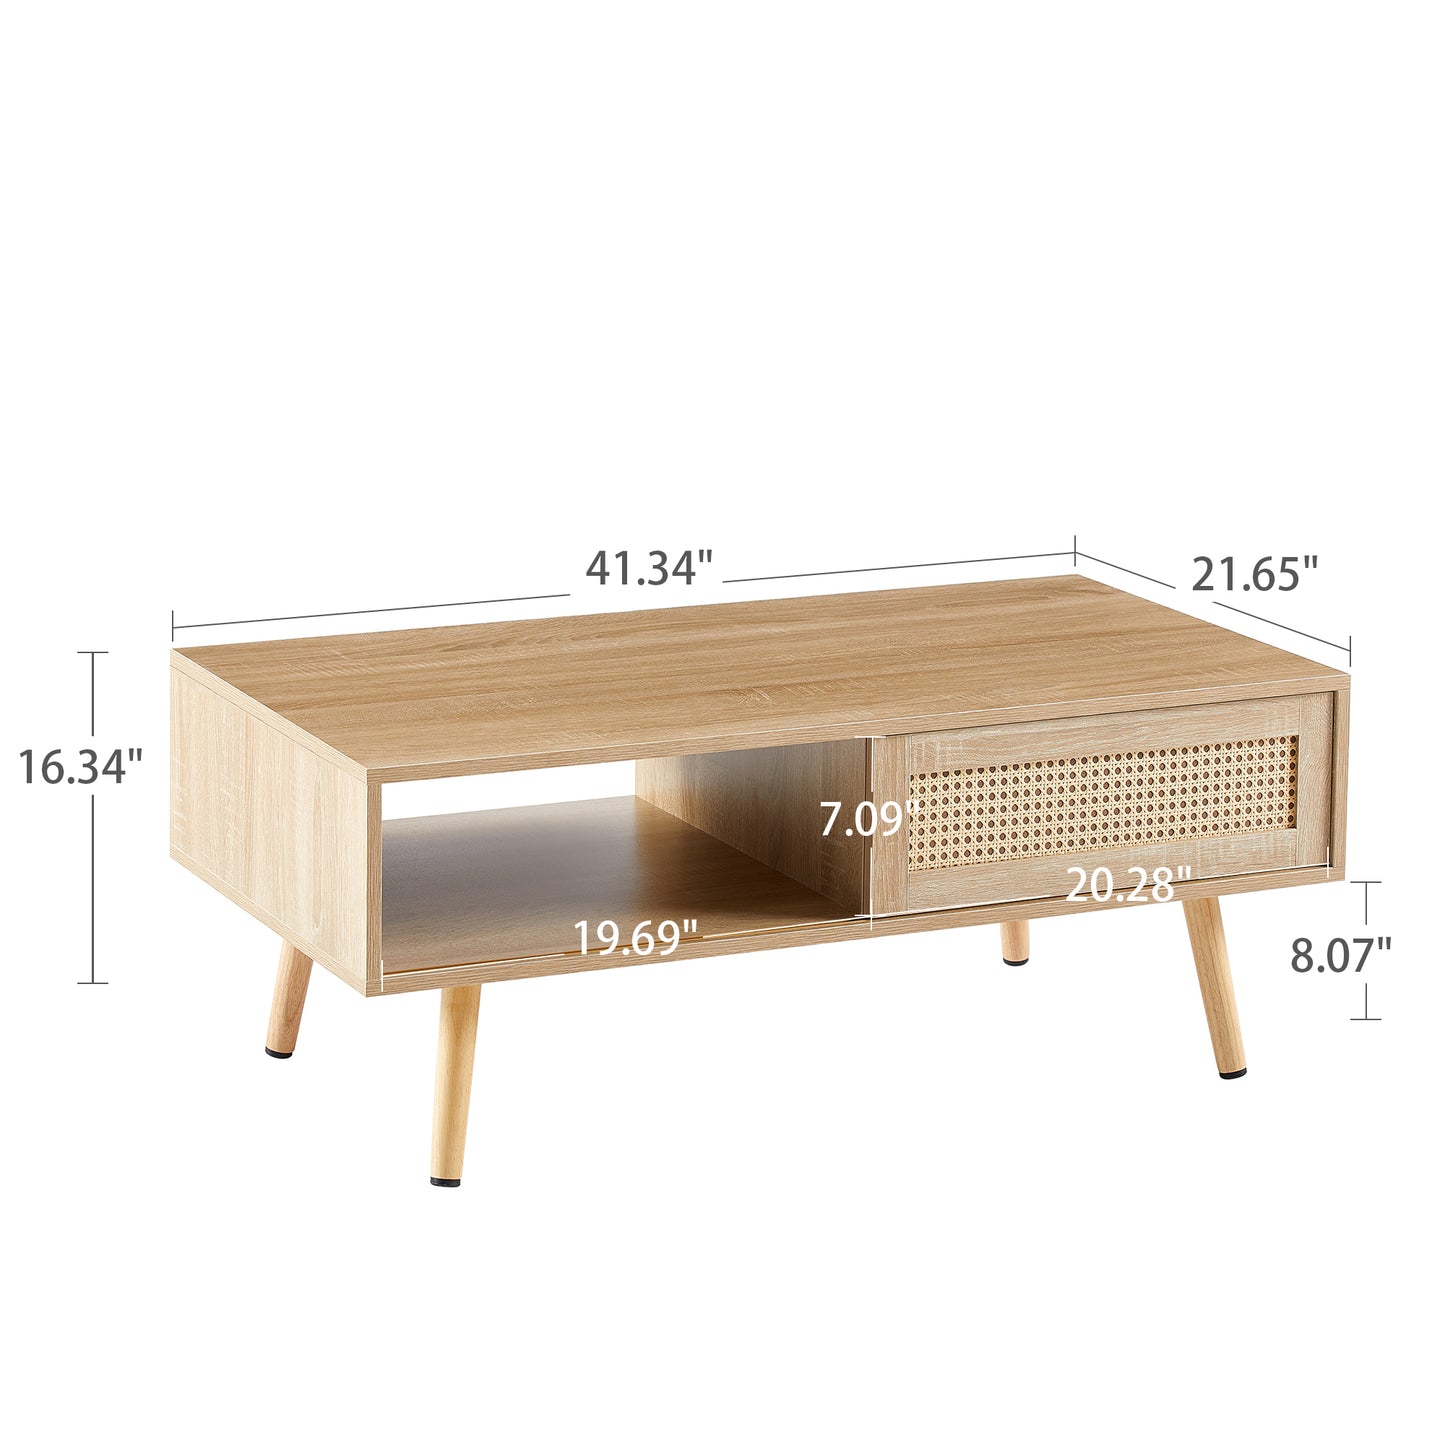 41.34" Rattan Coffee table, sliding door for storage, solid wood legs, Modern table  for living room , natural